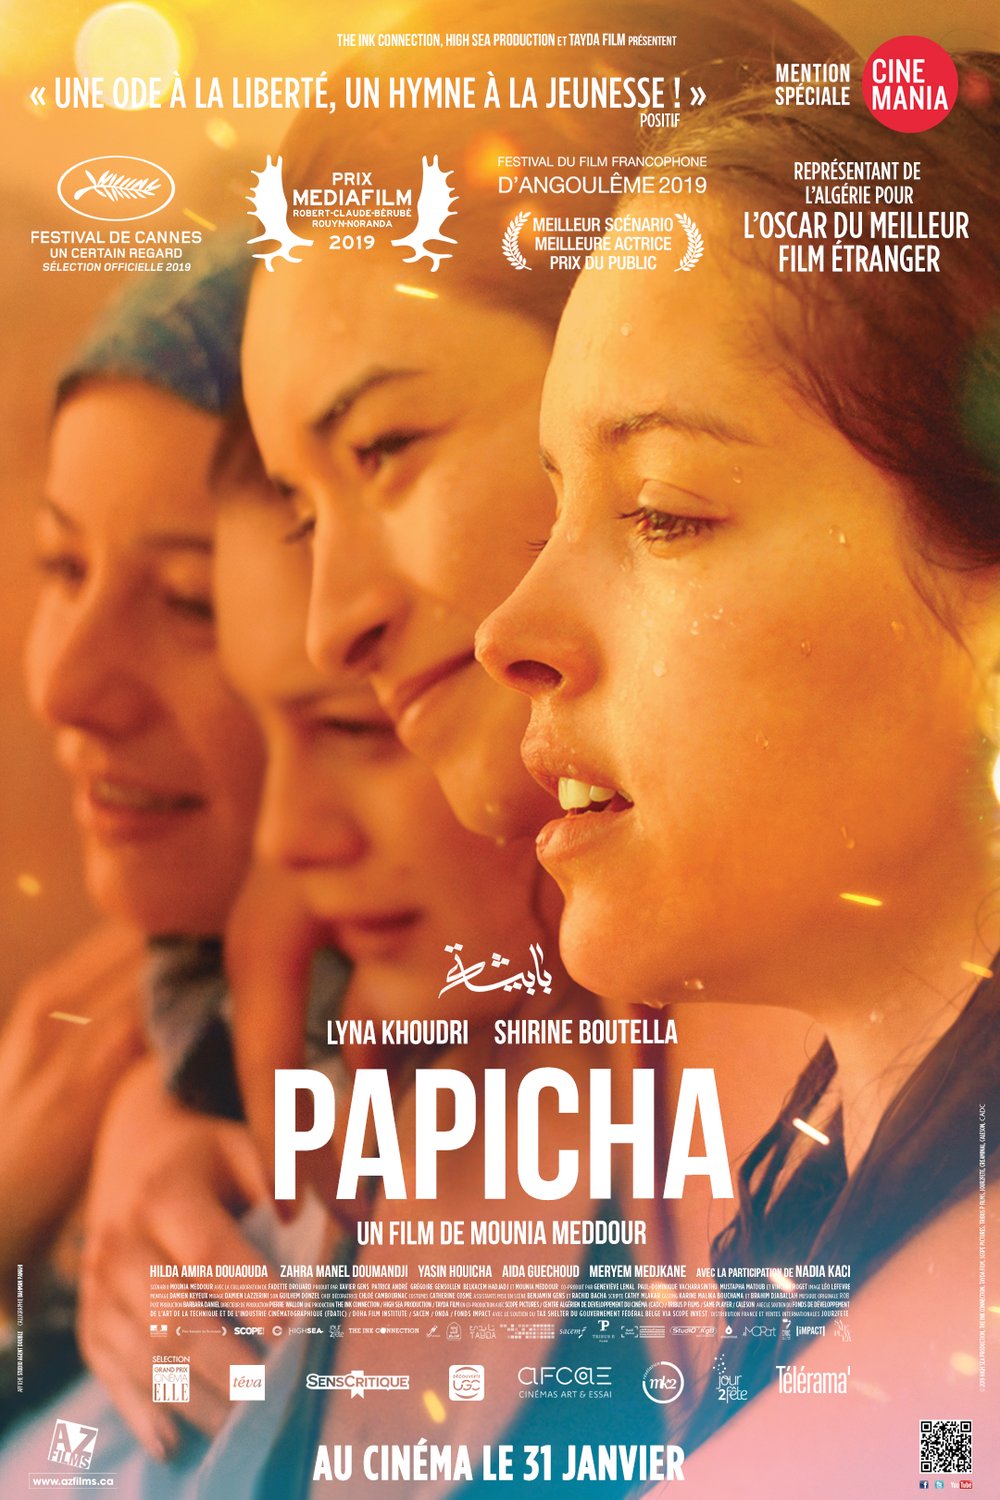 Poster of the movie Papicha